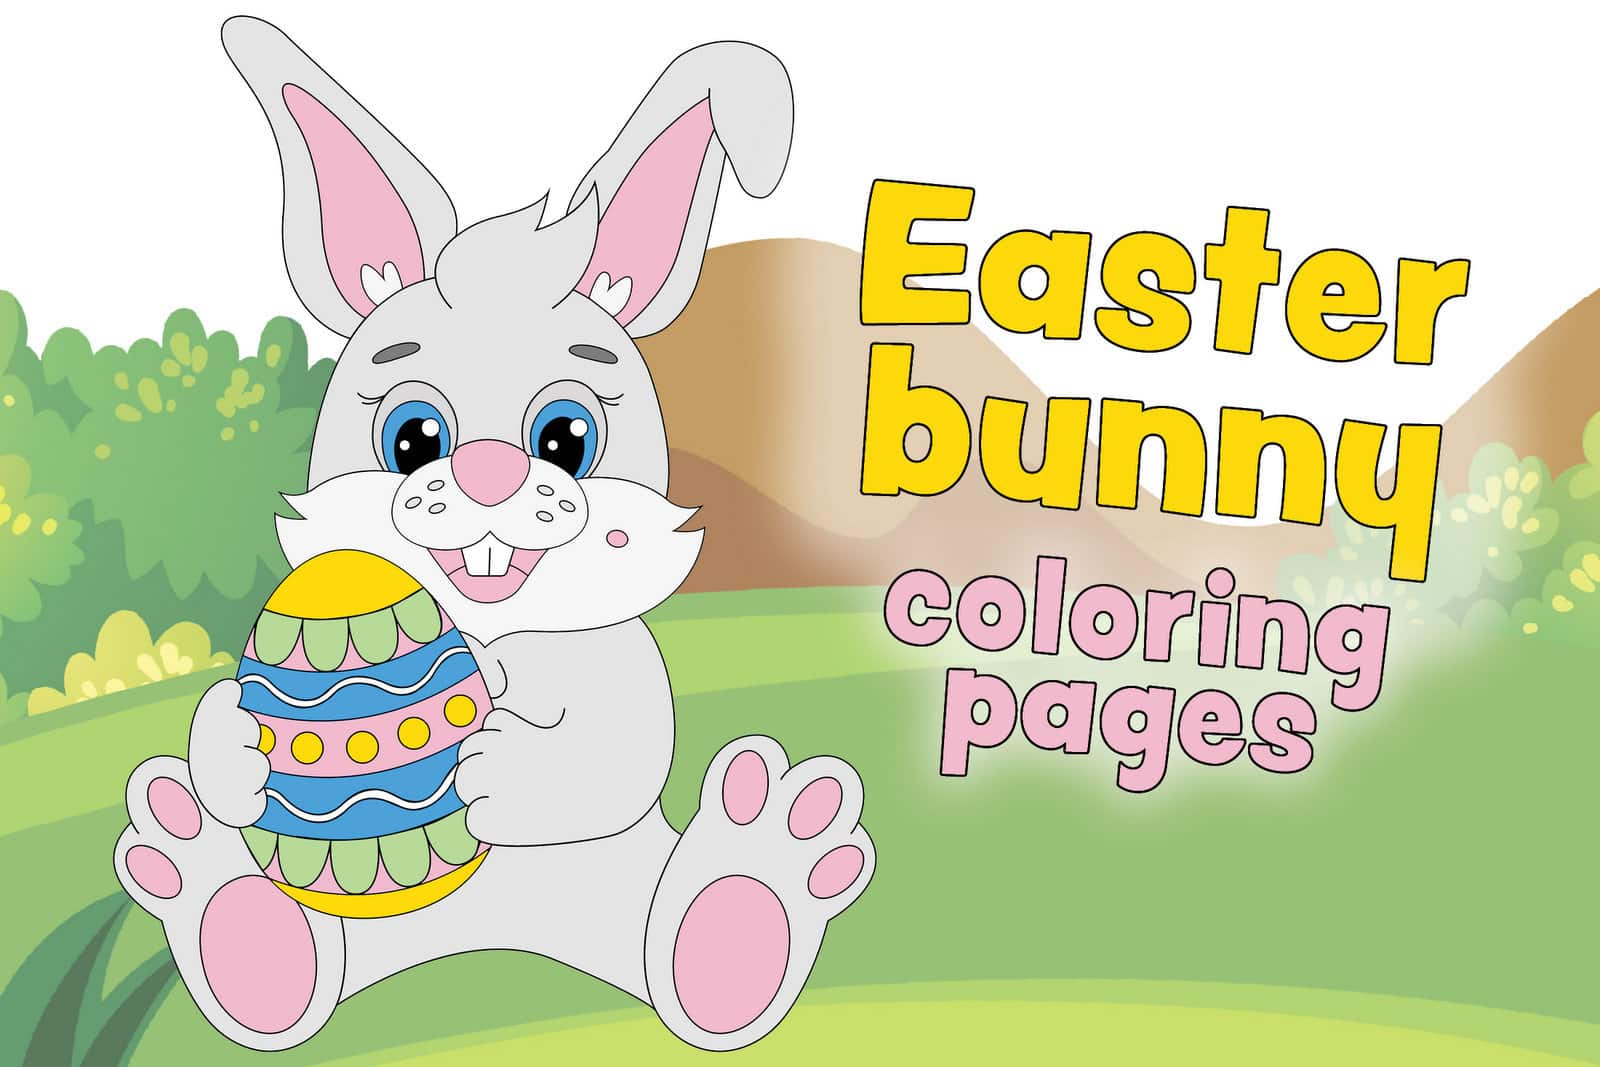 26 cute Easter bunny coloring pages - Print Color Fun!